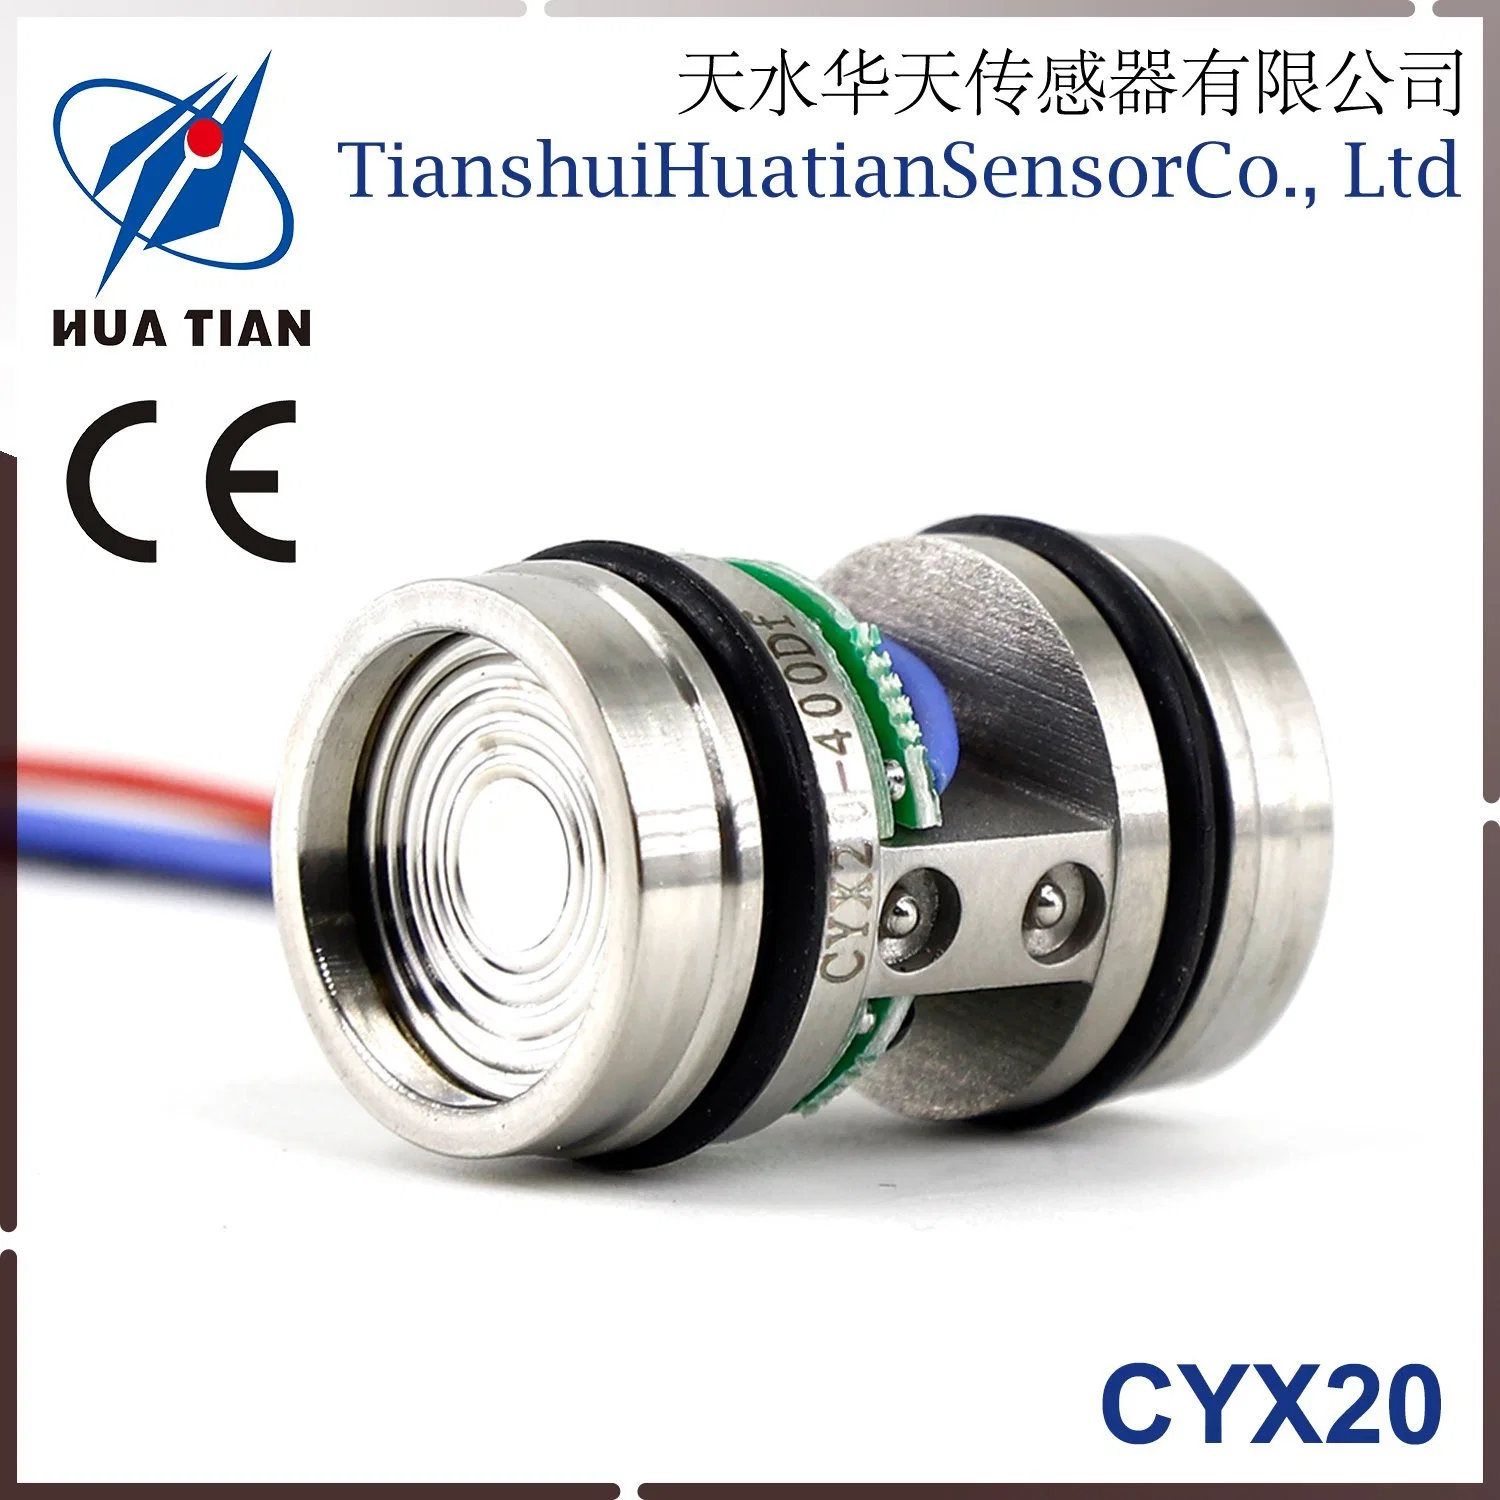 High Accuracy Small Outline Differential Pressure Sensor